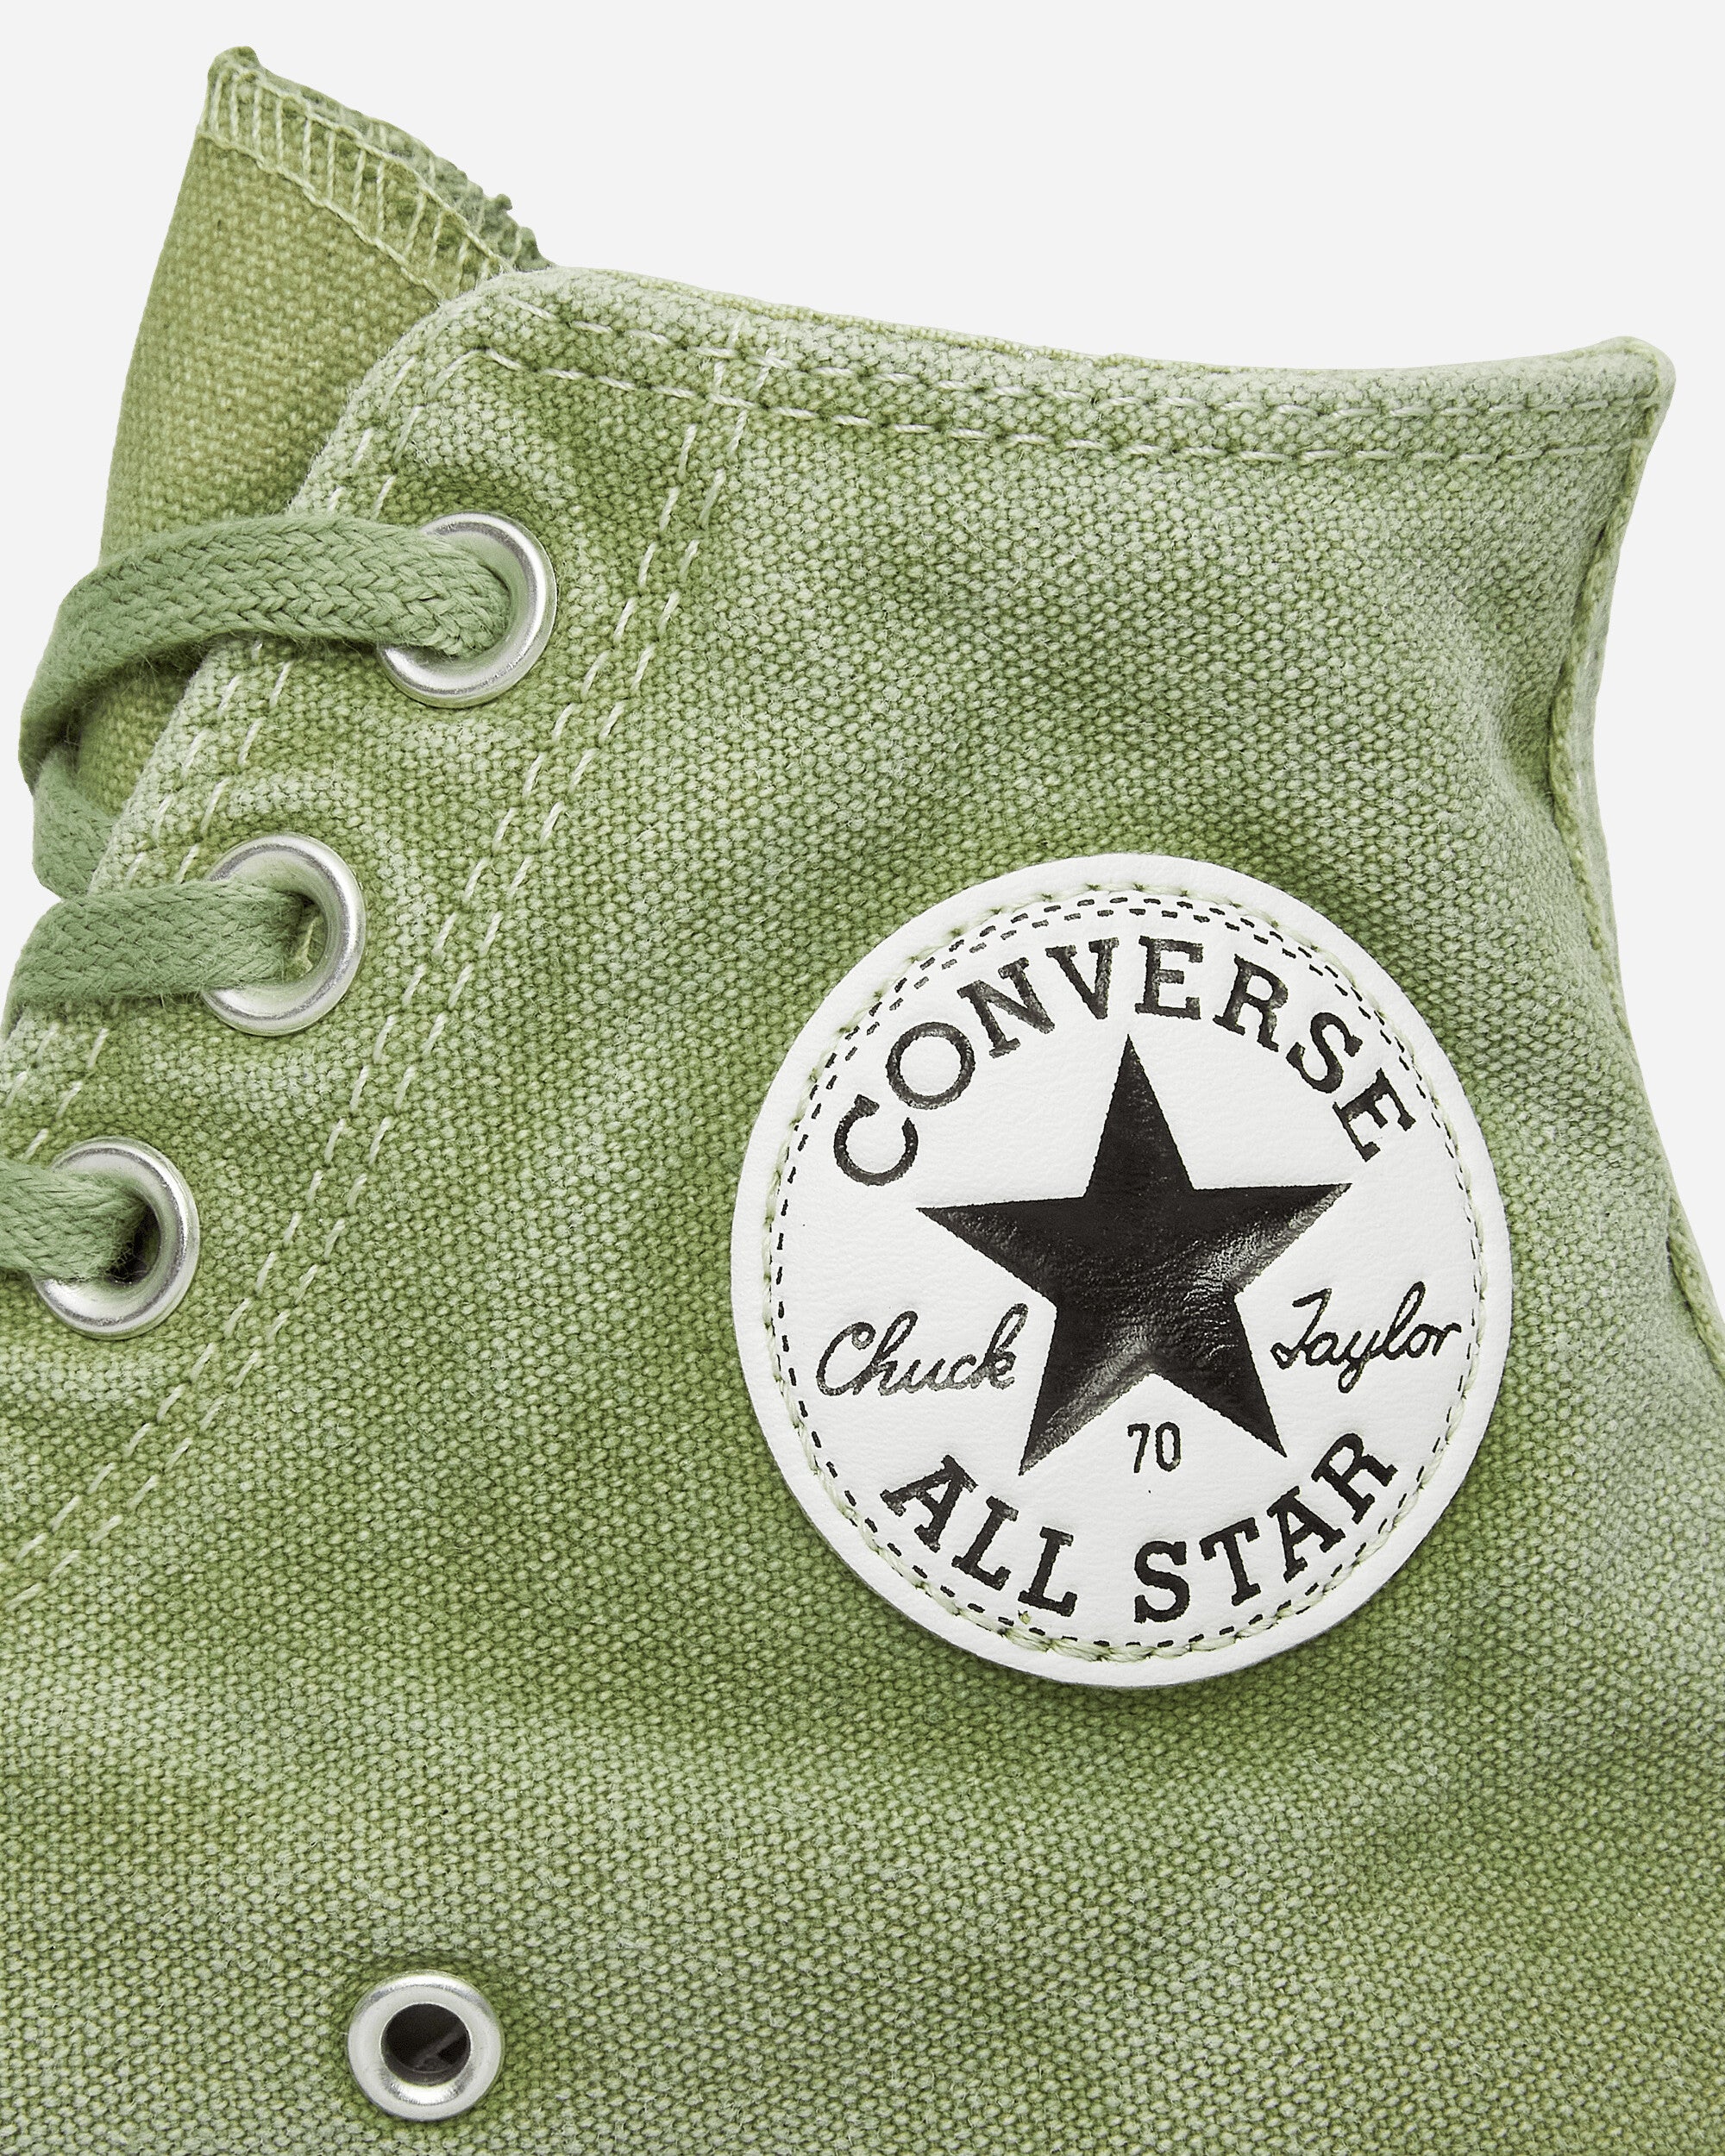 Converse Chuck 70 Canvas Ltd Icdc Green Salad Dyed Sneakers High A06916C